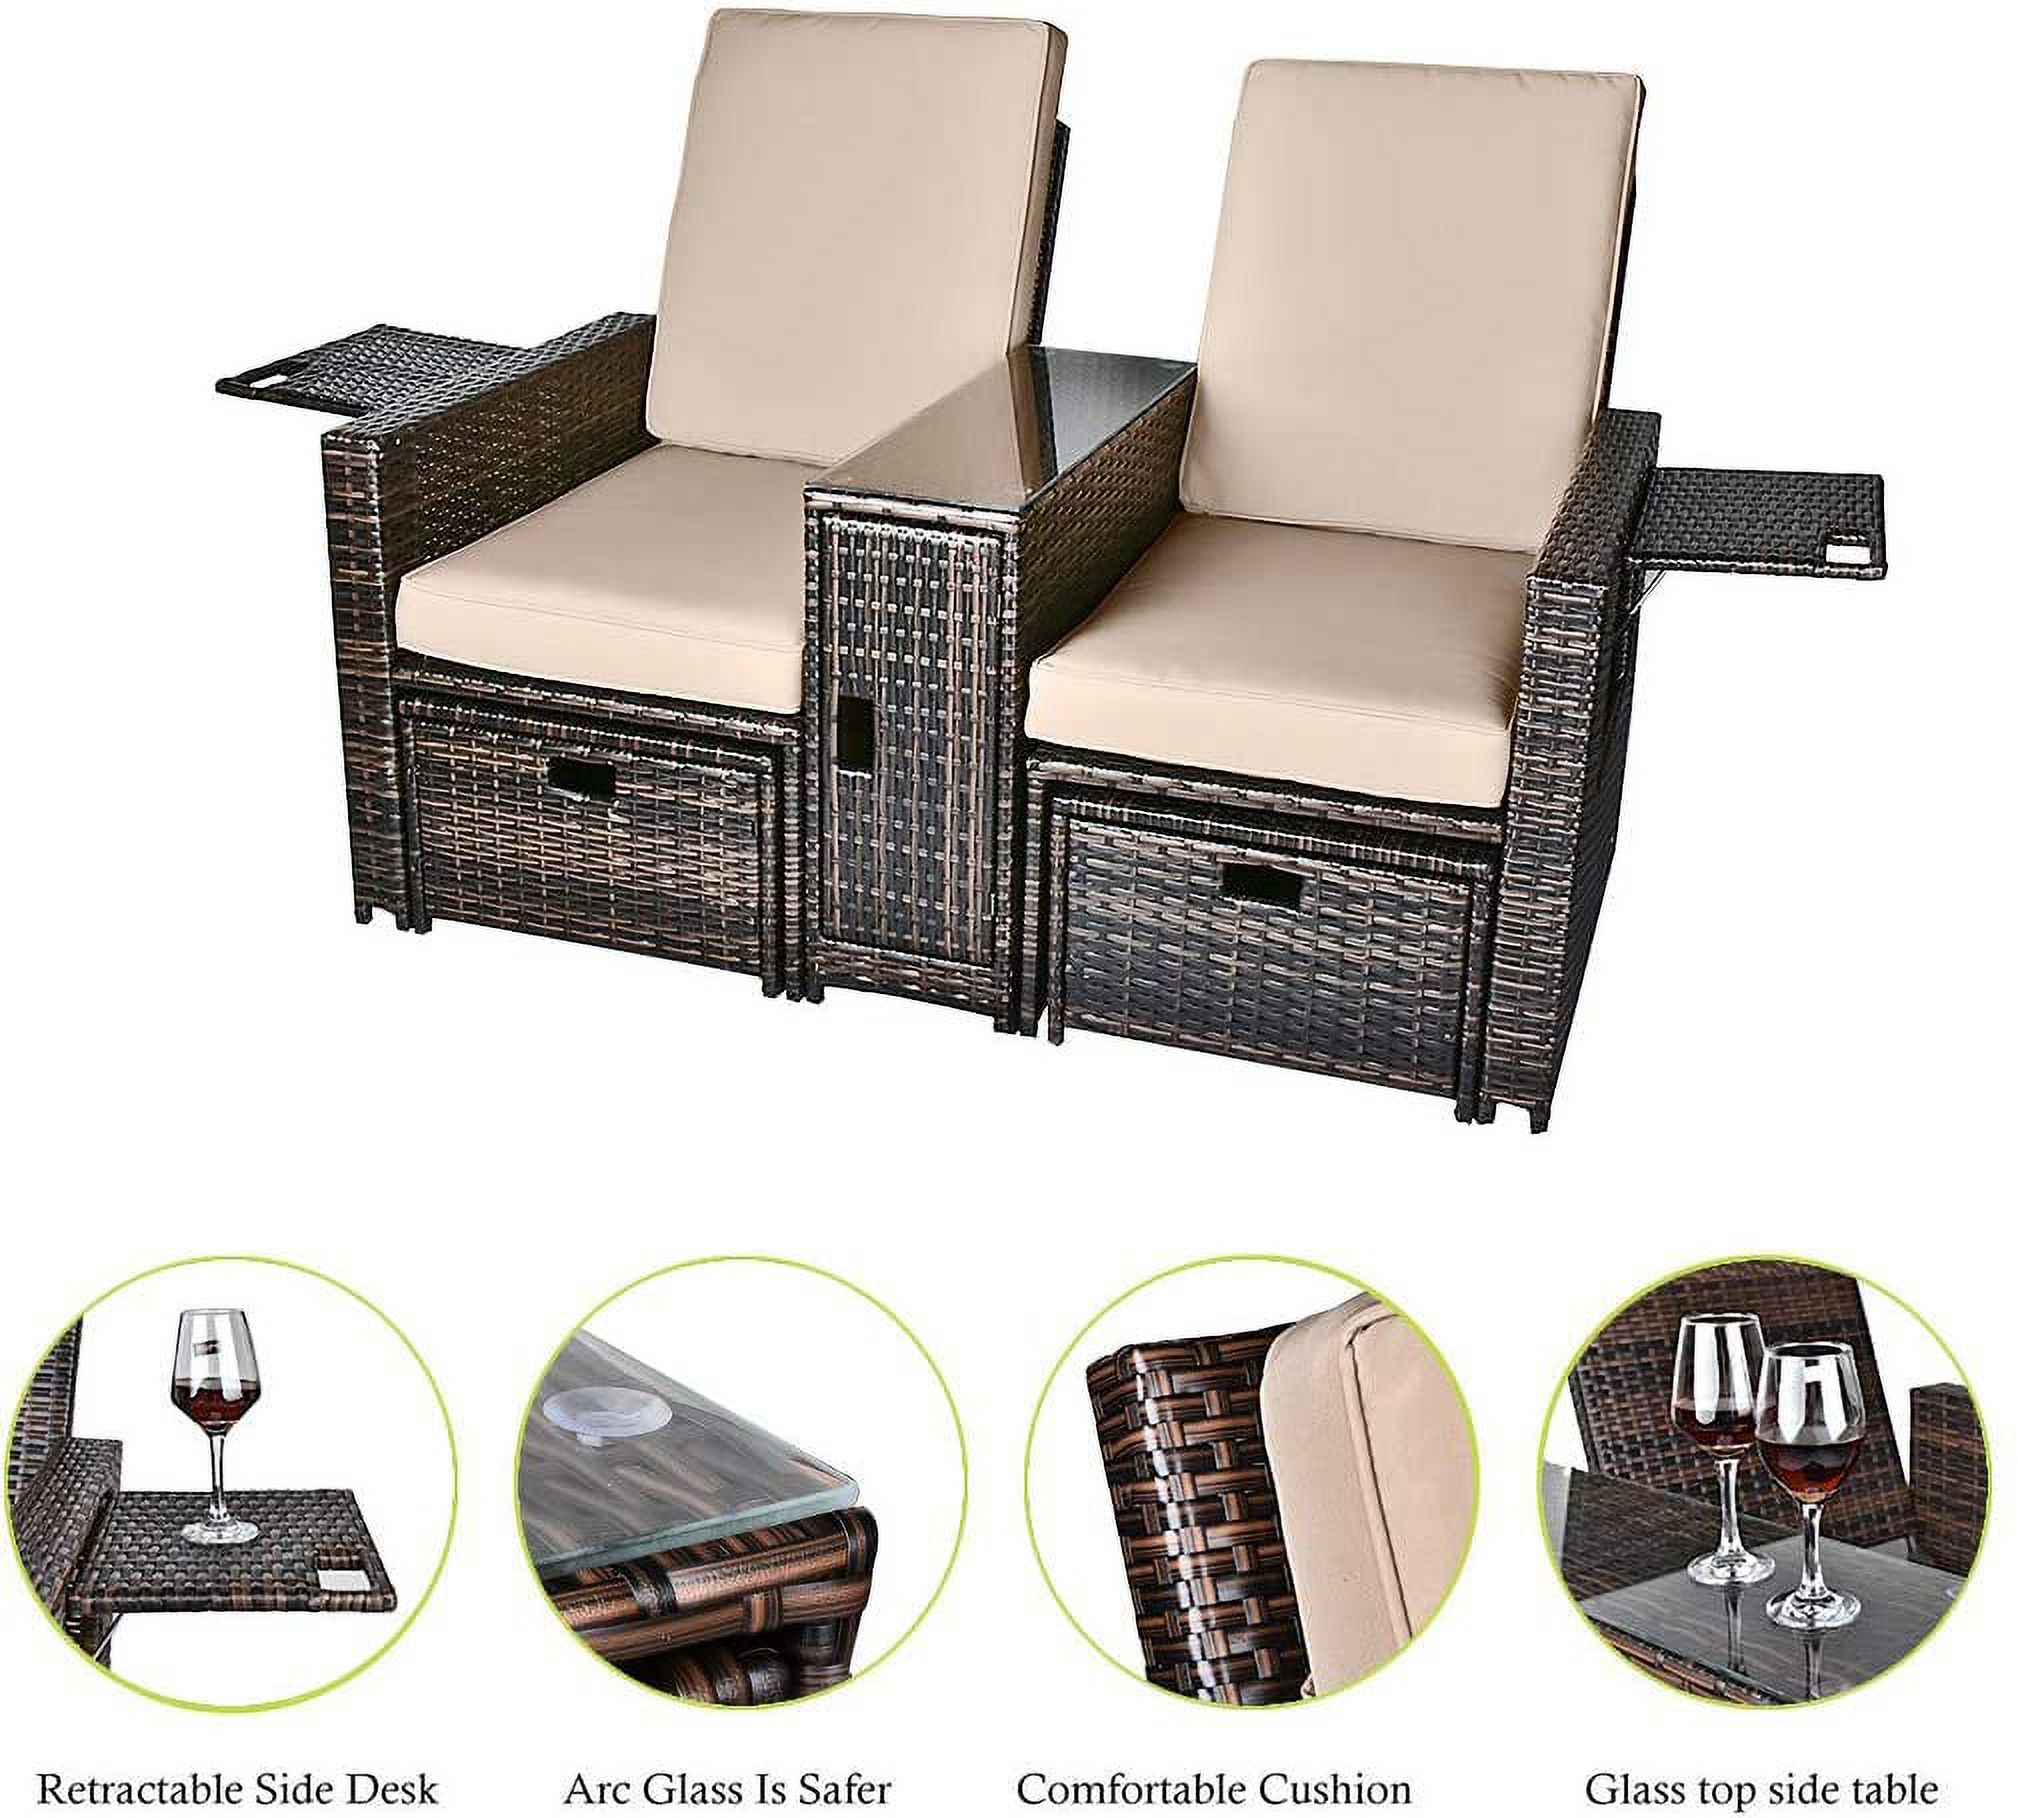 LVUYOYO 5pcs Patio Wicker Loveseat - Outdoor Rattan Sofa Set with Cushion - Wicker Furniture for Garden - image 2 of 7